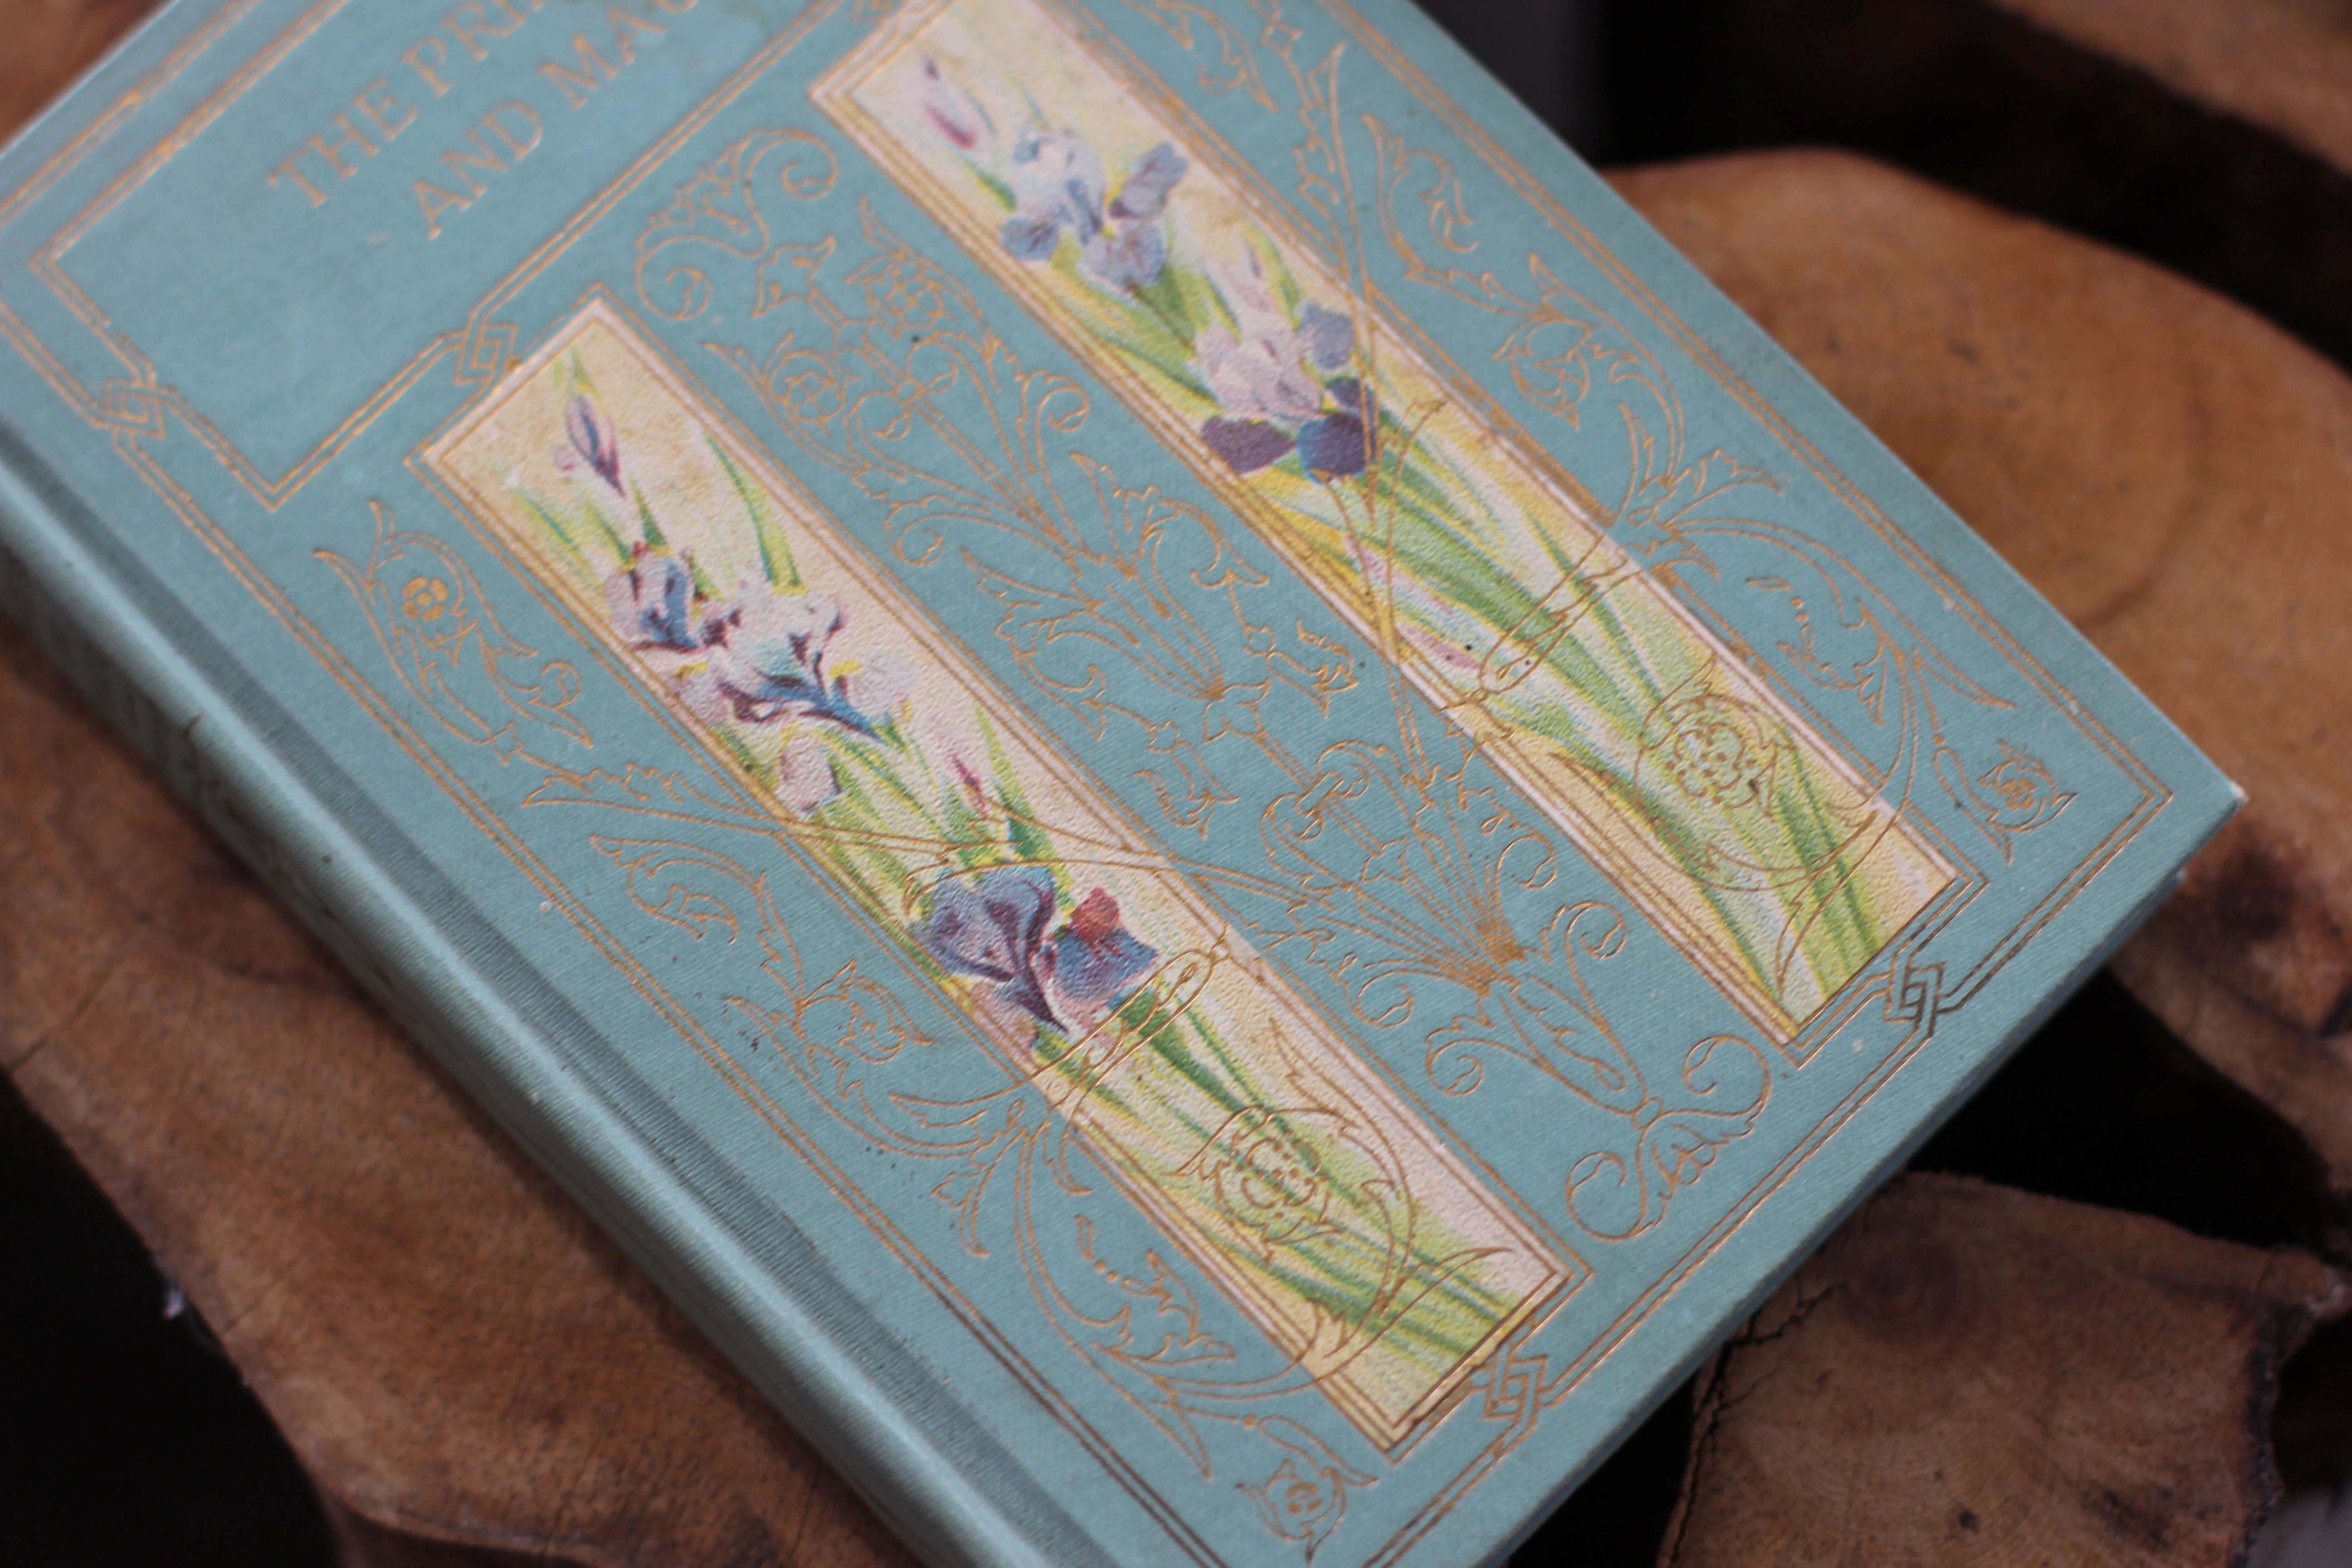 Antique The Princess And Maud Alfred, Lord Tennyson Altemus Hardcover Book